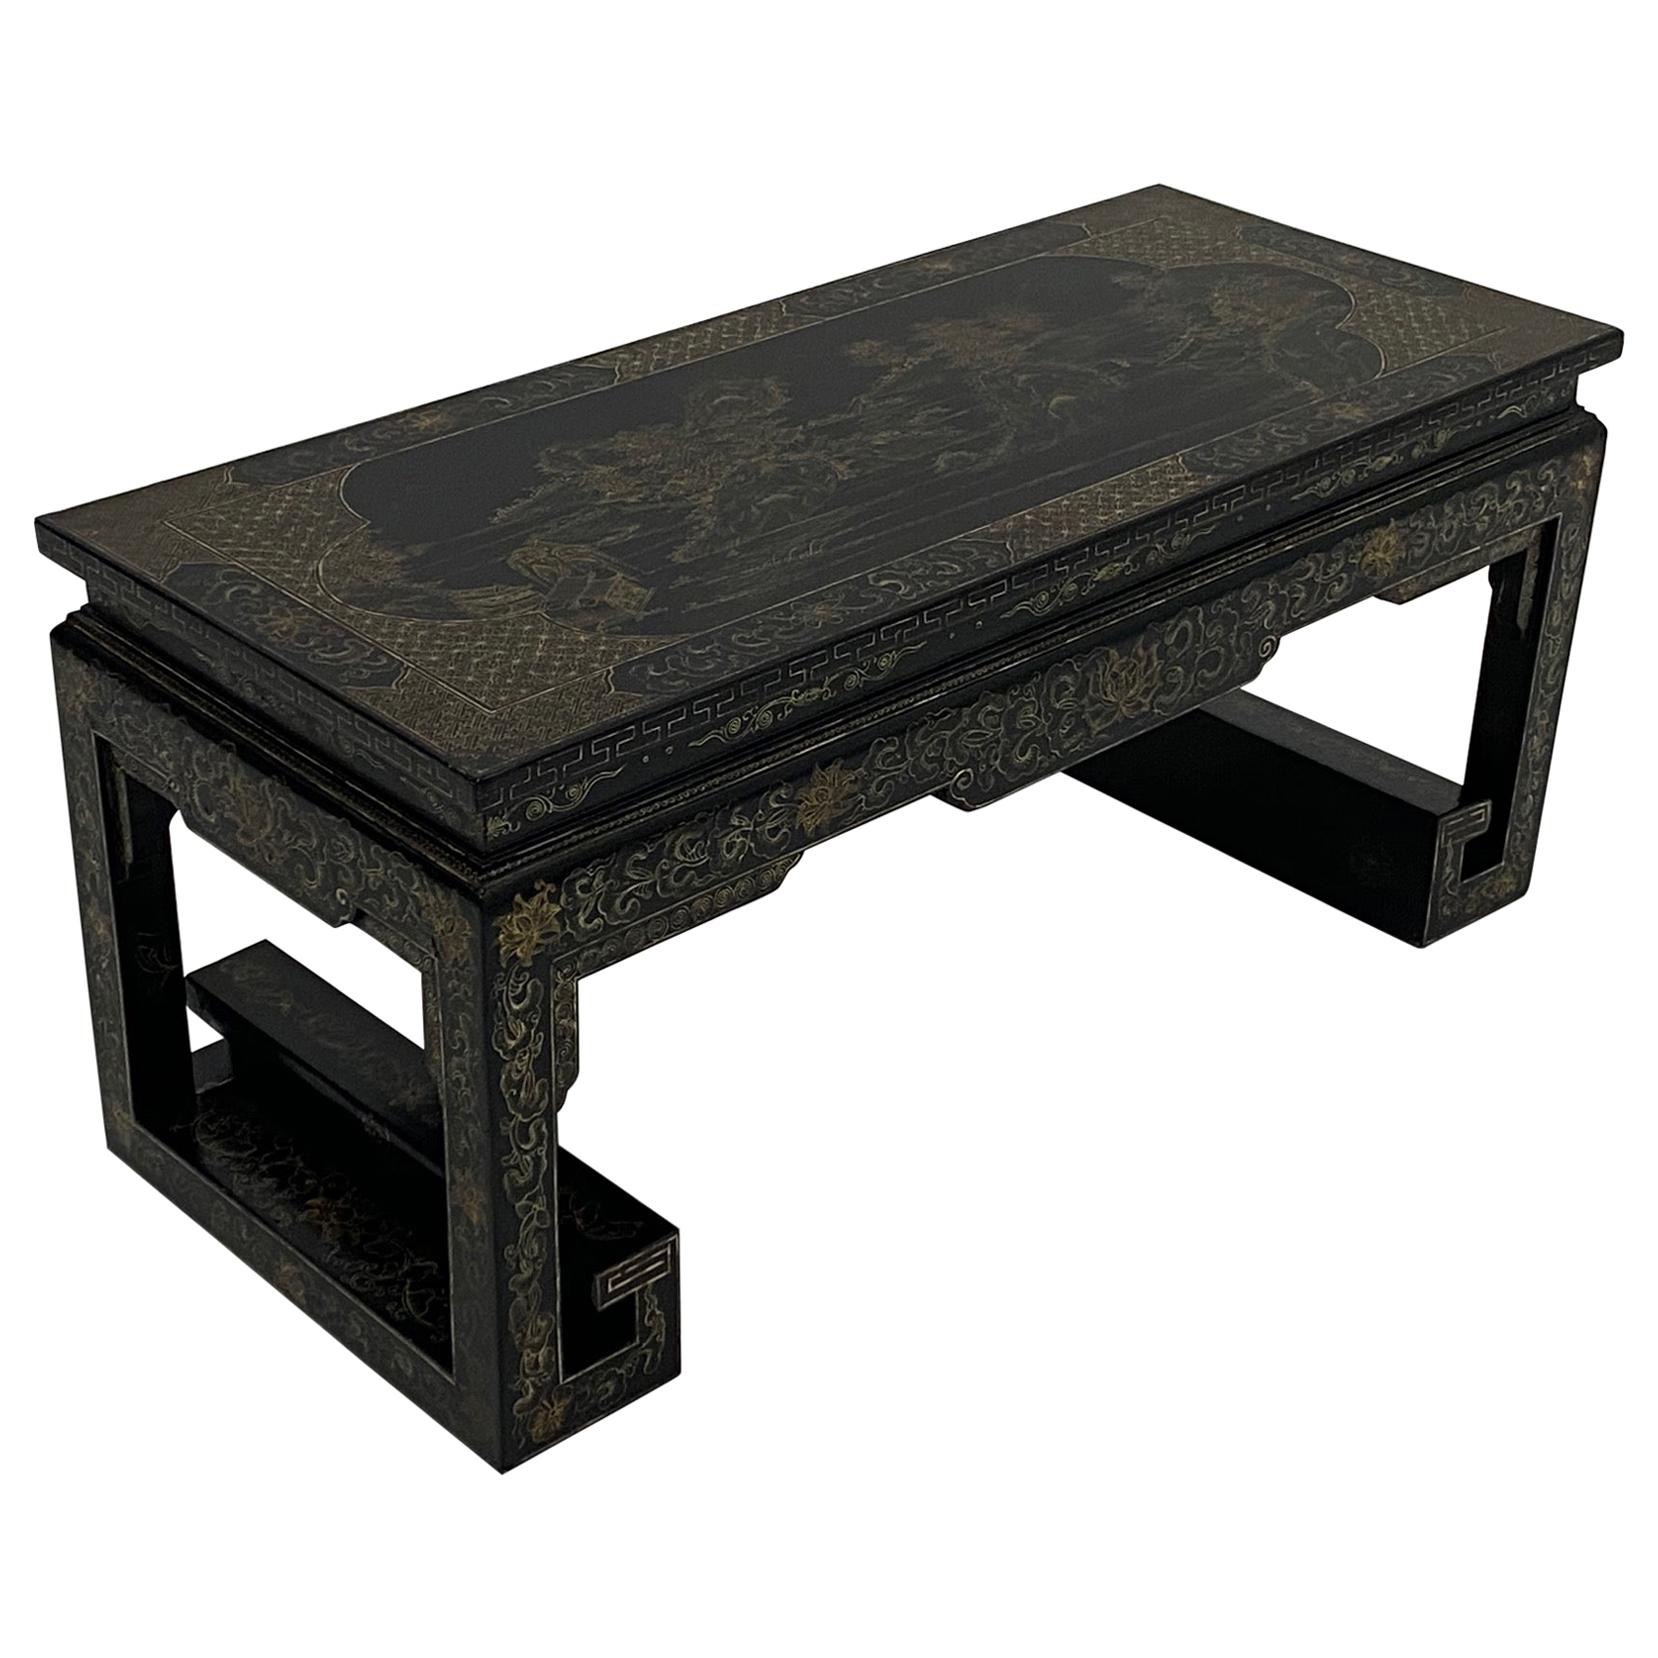 Beautifully Shaped and Decorated Chinese Lacquer Table